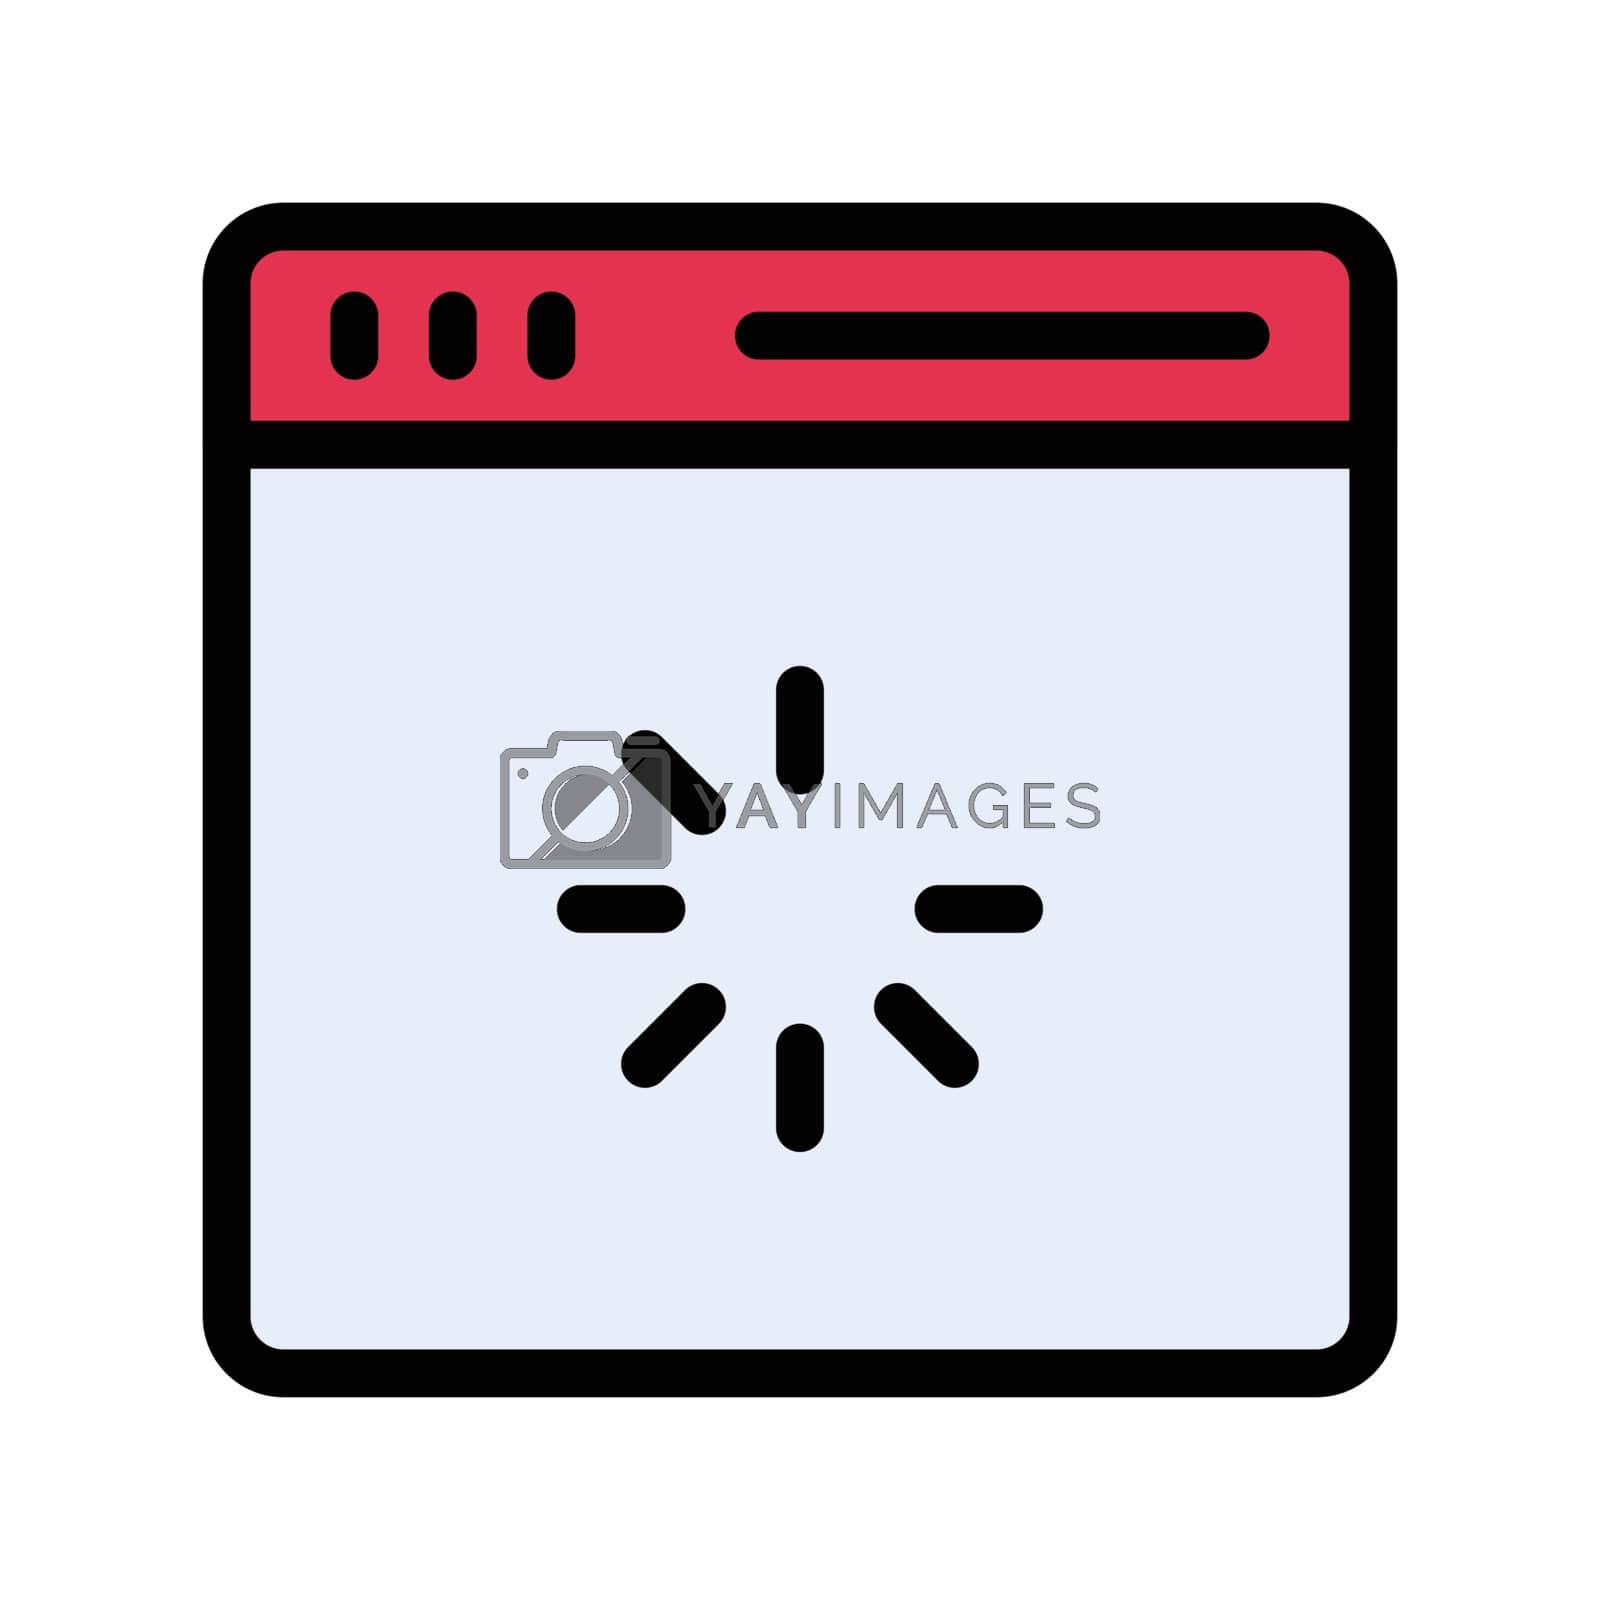 Royalty free image of browsing by vectorstall